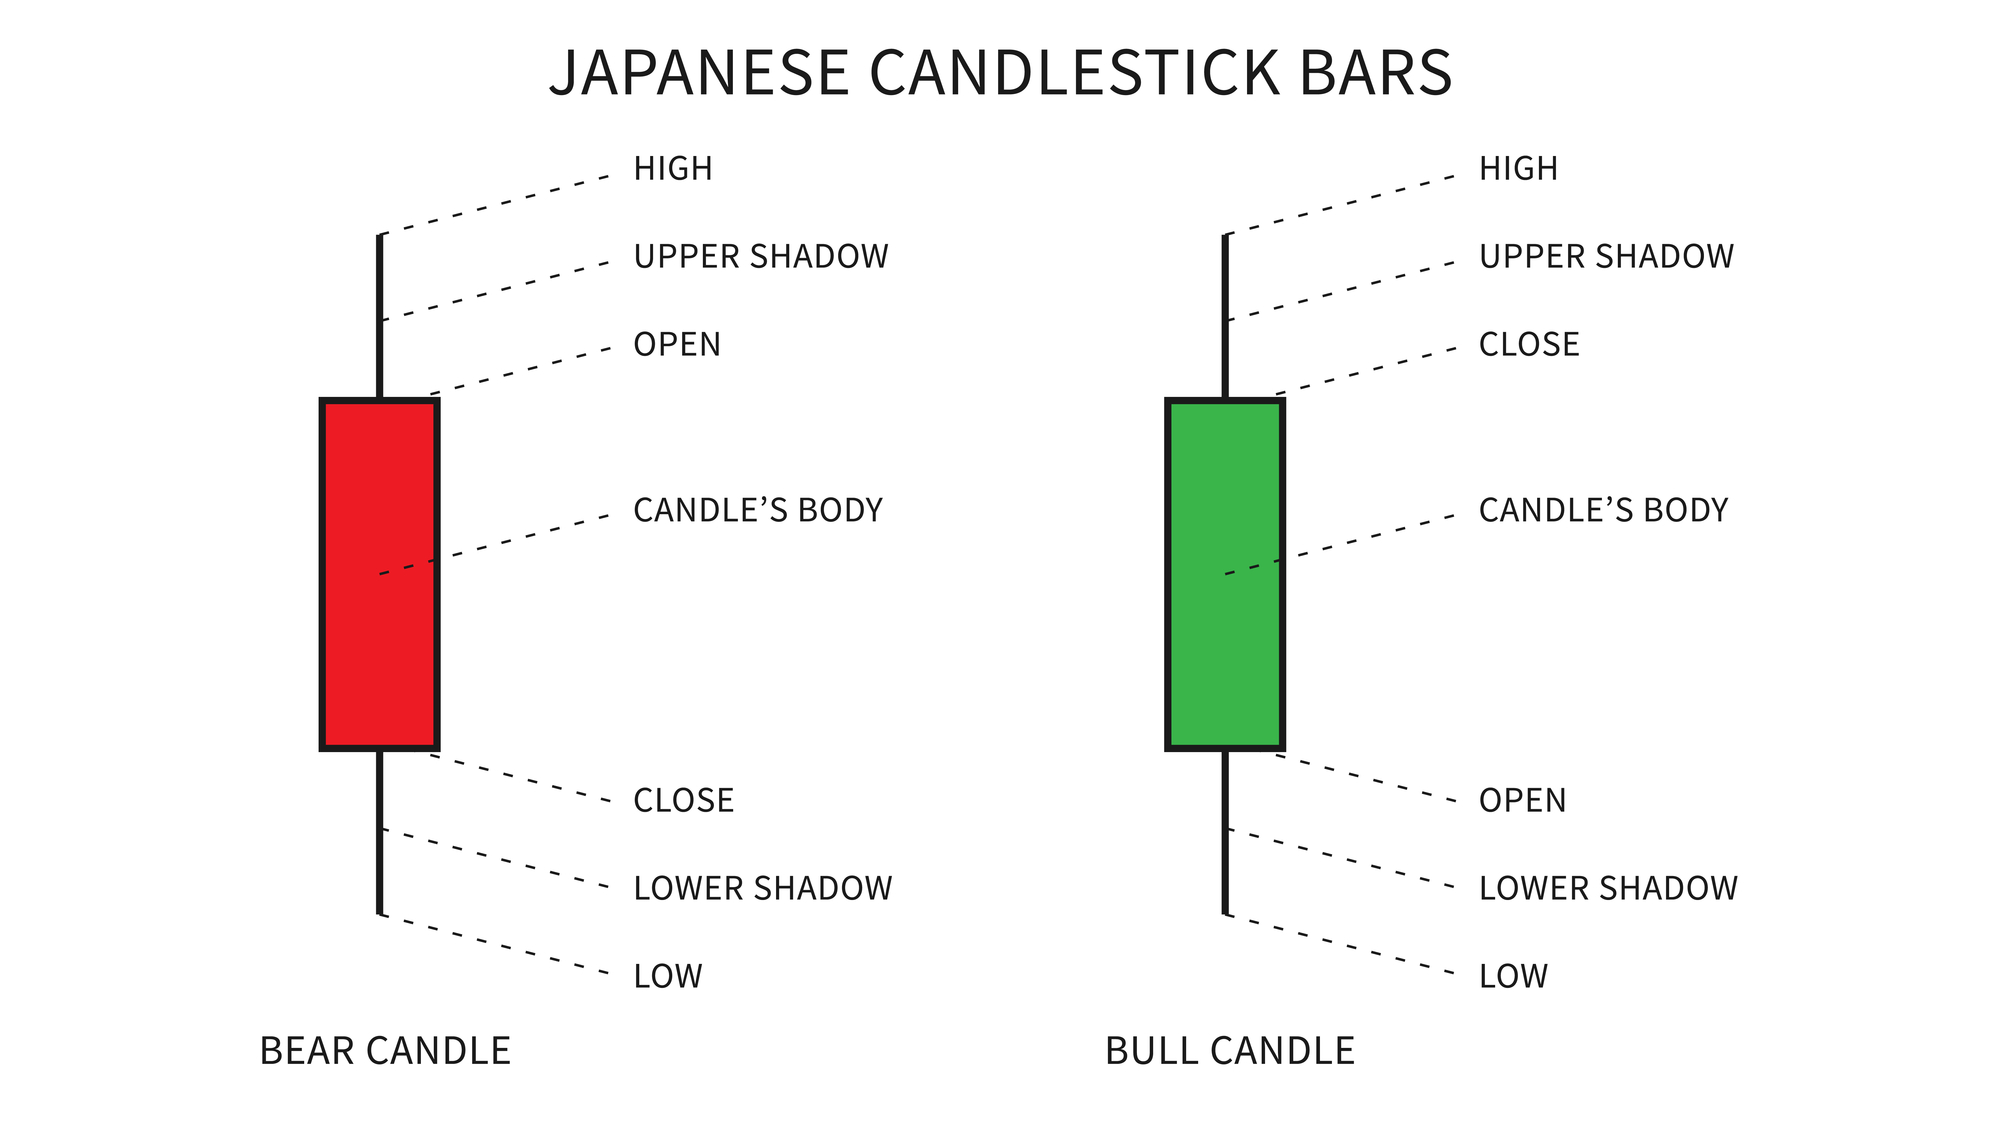 Japanese candlesticks for financial trading